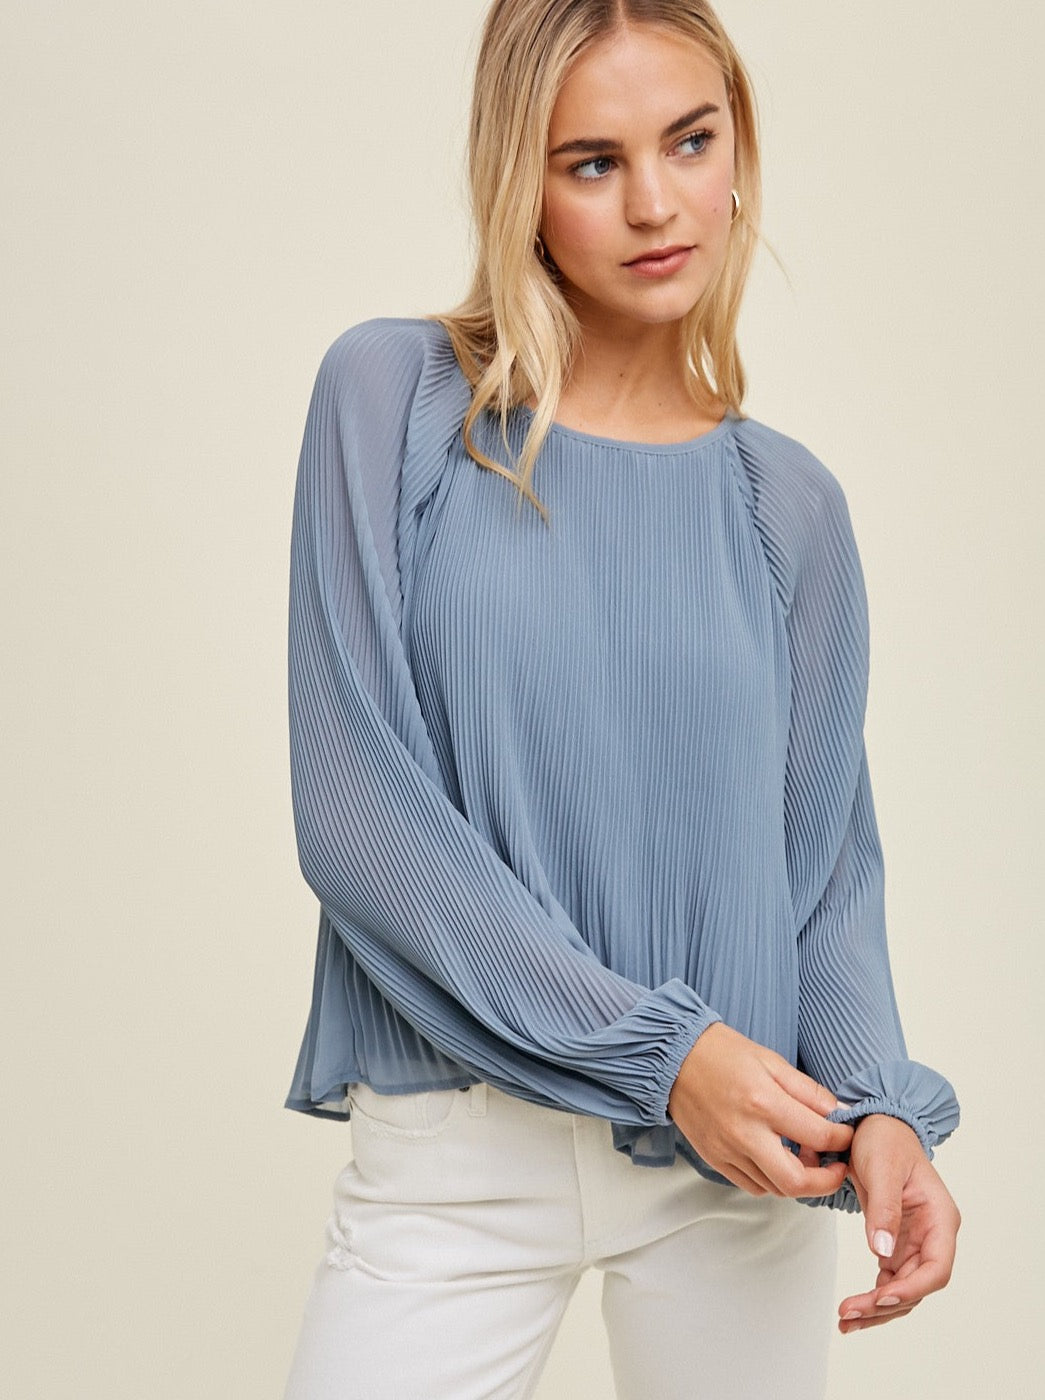 Mountain Blue Business Casual Blouse